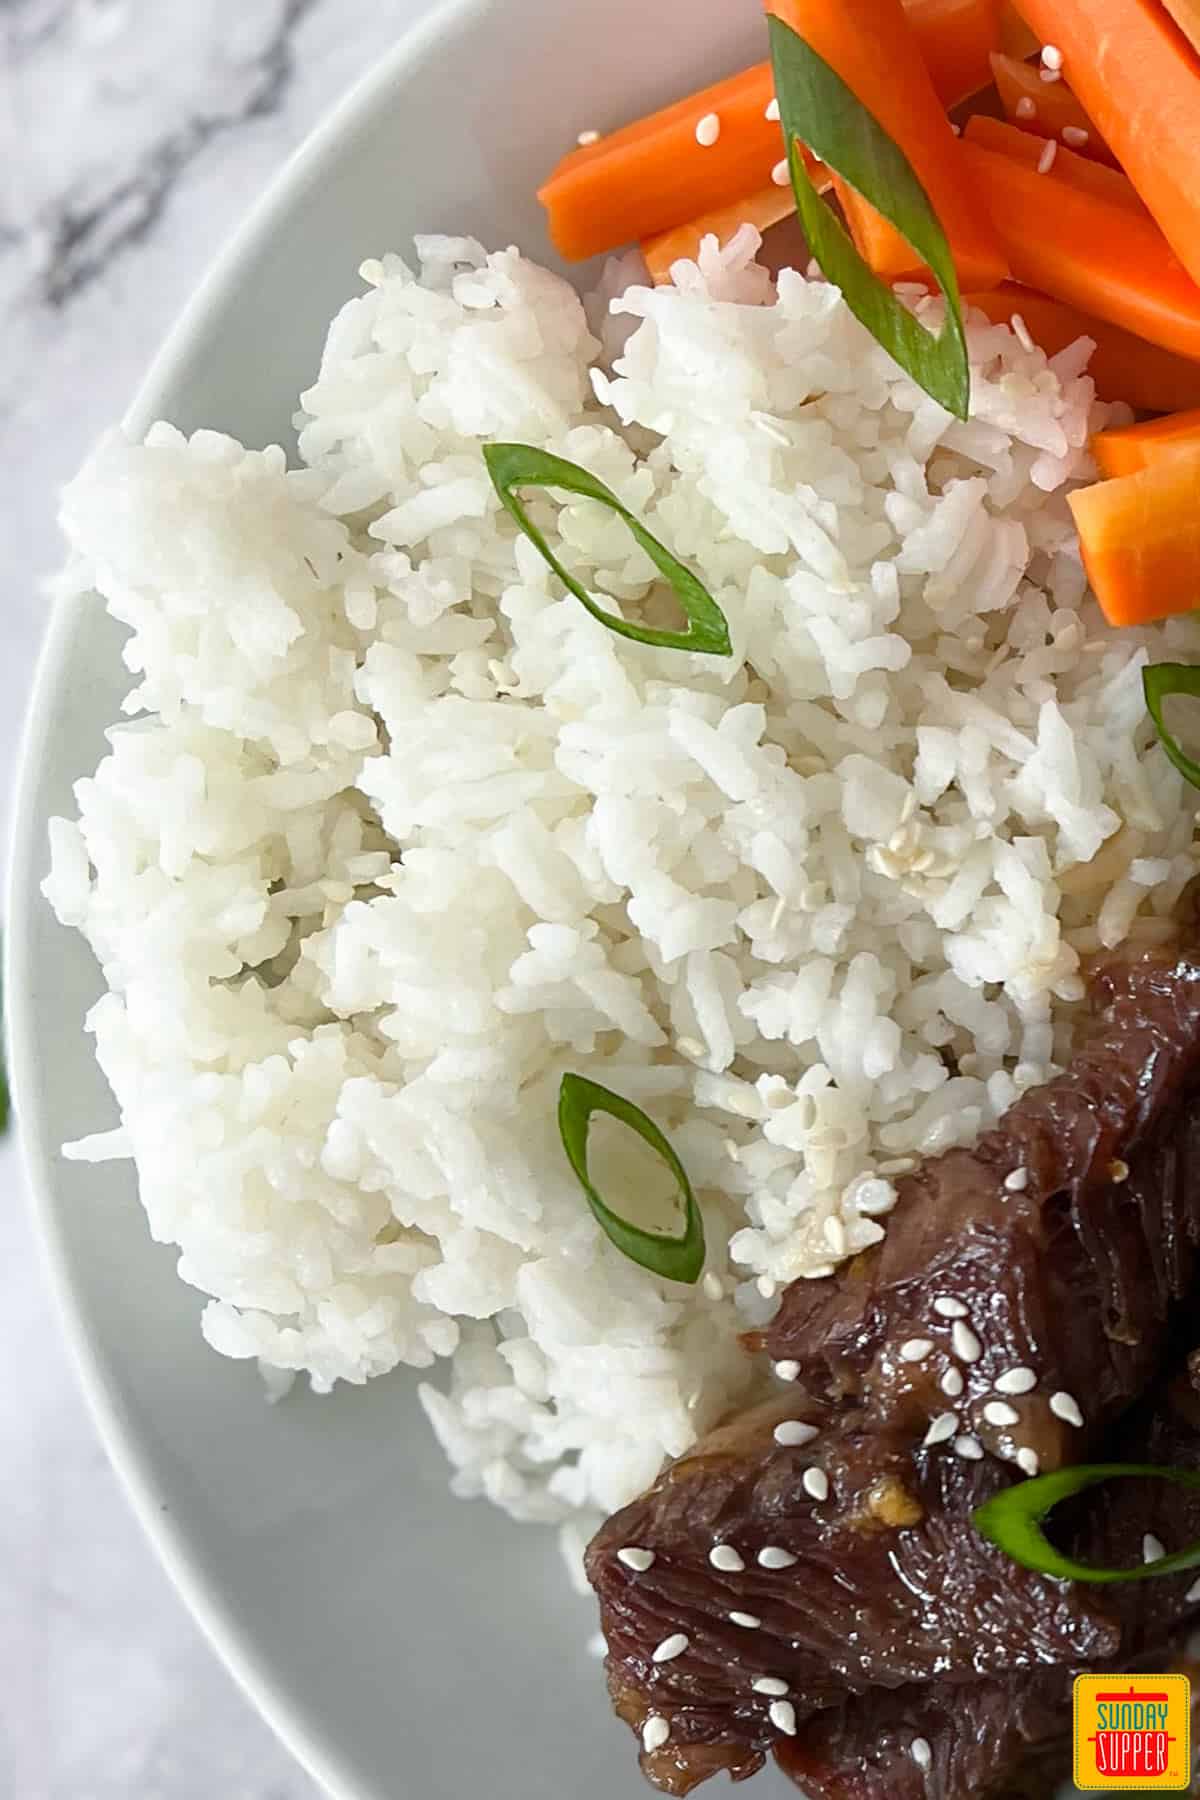 microwave rice on white plate with green onions, carrots and sliced beef